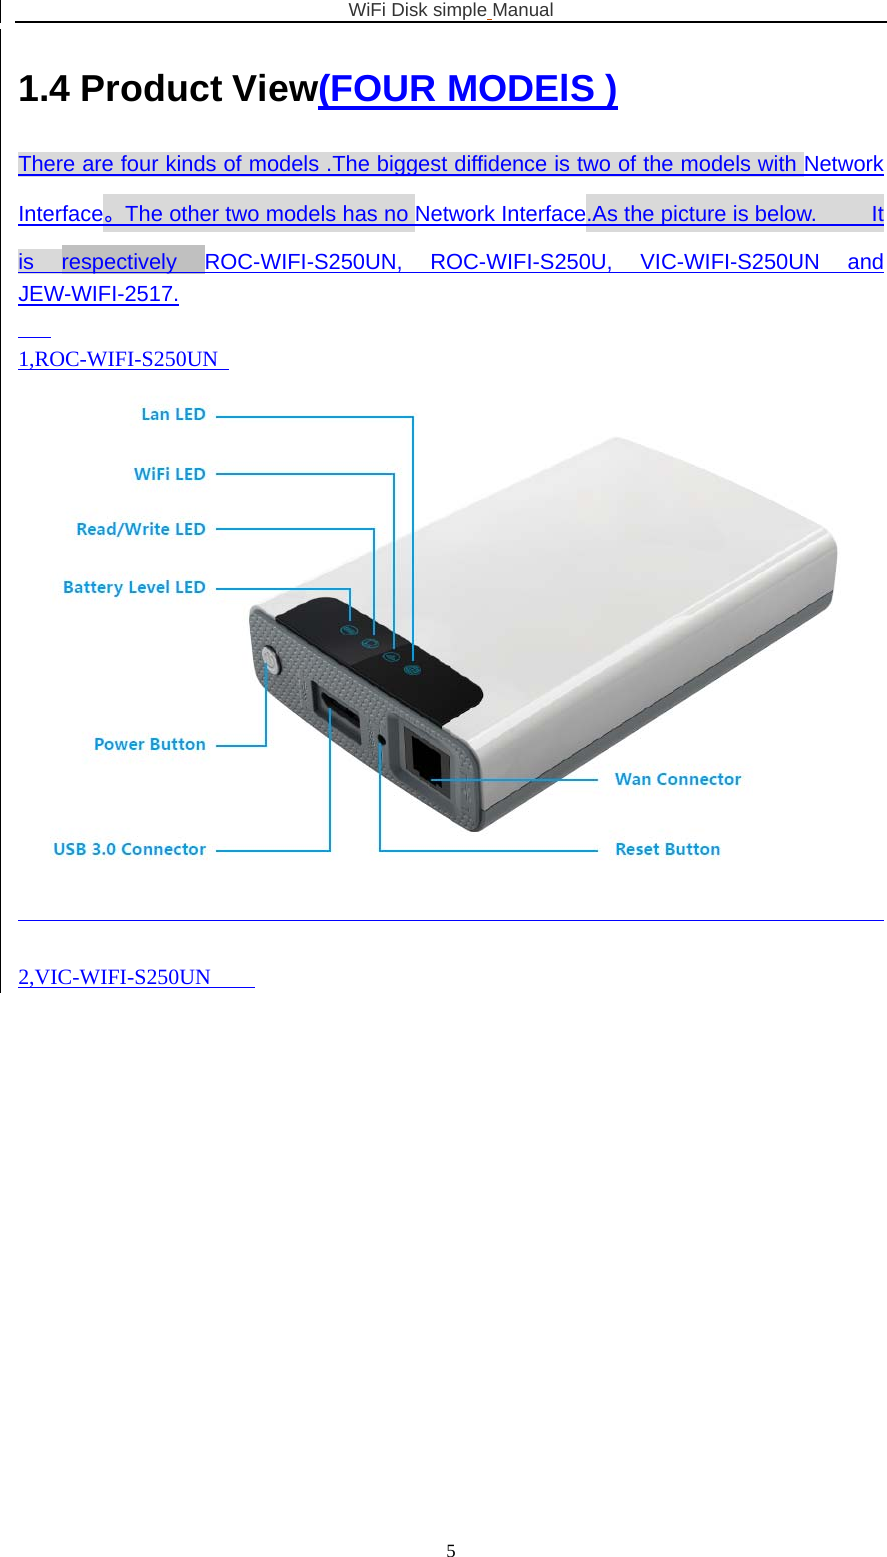 WiFi Disk simple Manual  51.4 Product View(FOUR MODElS ) There are four kinds of models .The biggest diffidence is two of the models with Network Interface。The other two models has no Network Interface.As the picture is below.     It is respectively ROC-WIFI-S250UN, ROC-WIFI-S250U, VIC-WIFI-S250UN and JEW-WIFI-2517.     1,ROC-WIFI-S250UN     2,VIC-WIFI-S250UN     